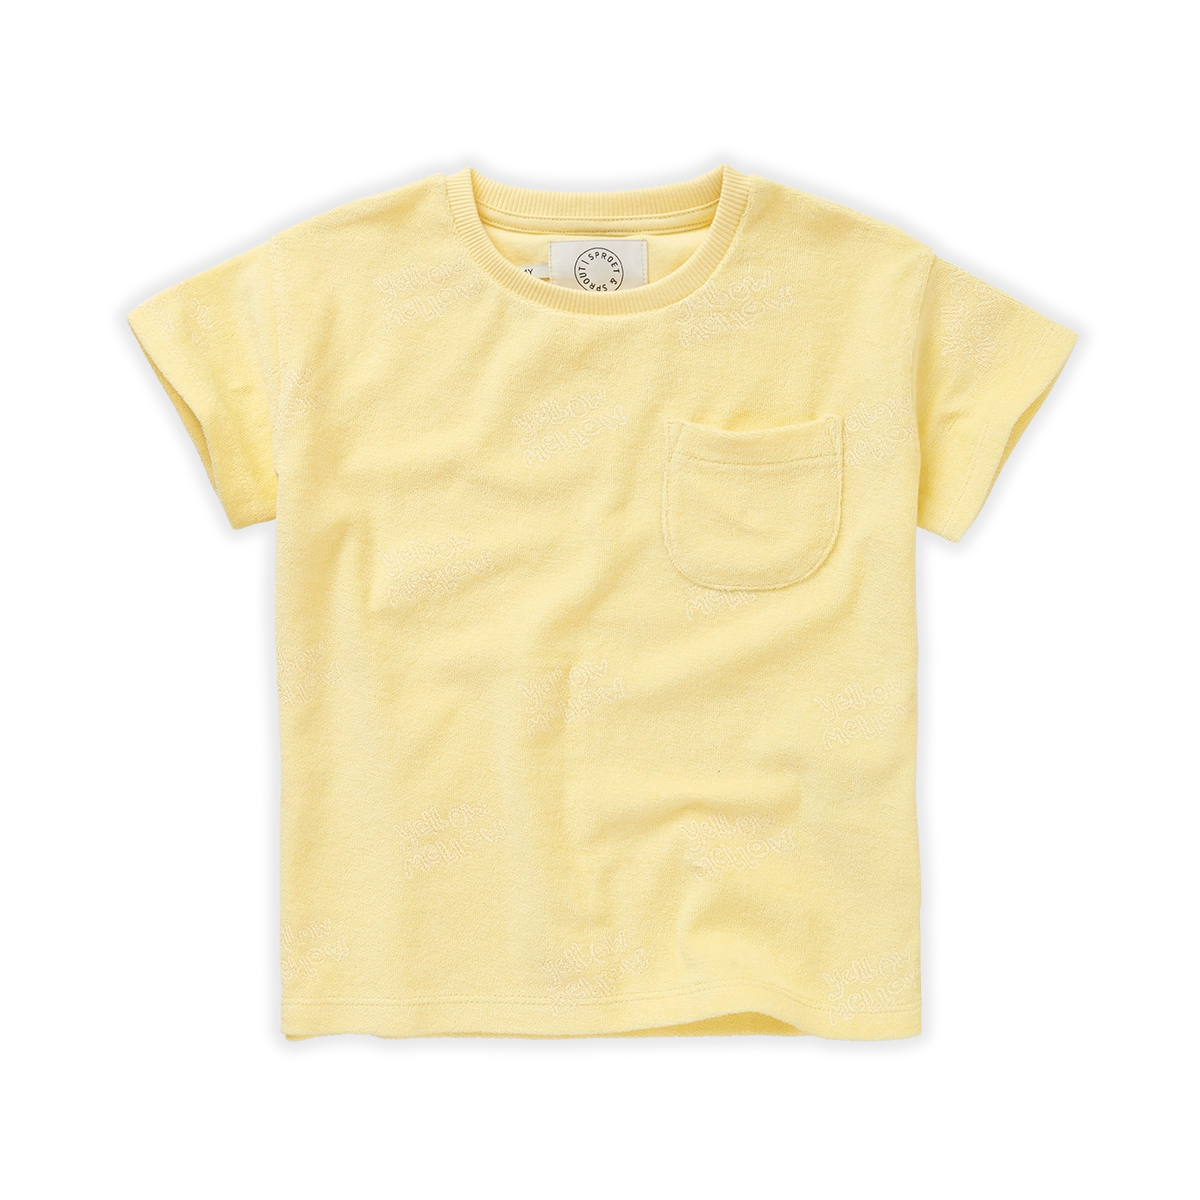 SPROET & SPROUT YELLOW POCKET TSHIRT [FINAL SALE]